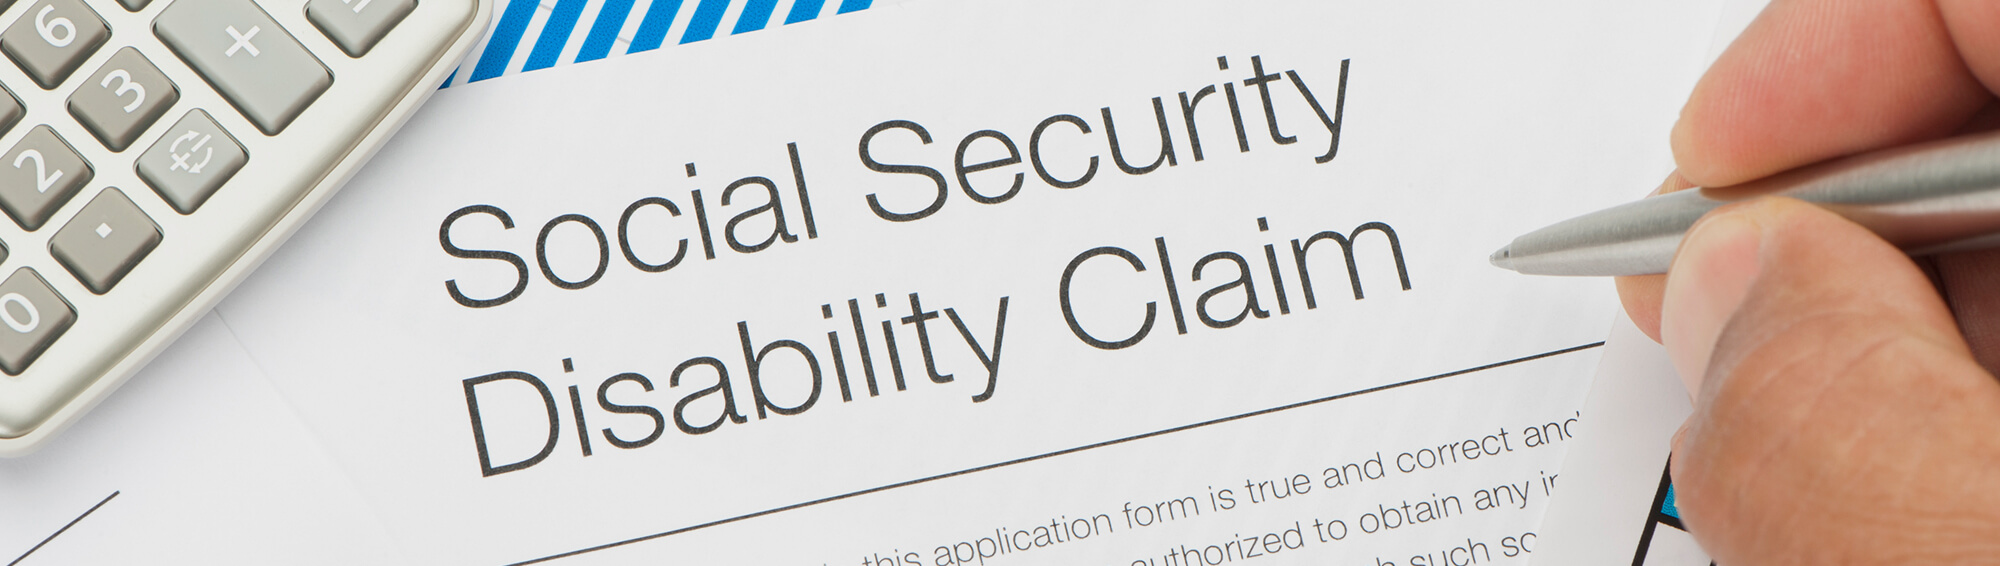 How to Get Monthly Social Security Disability Benefits